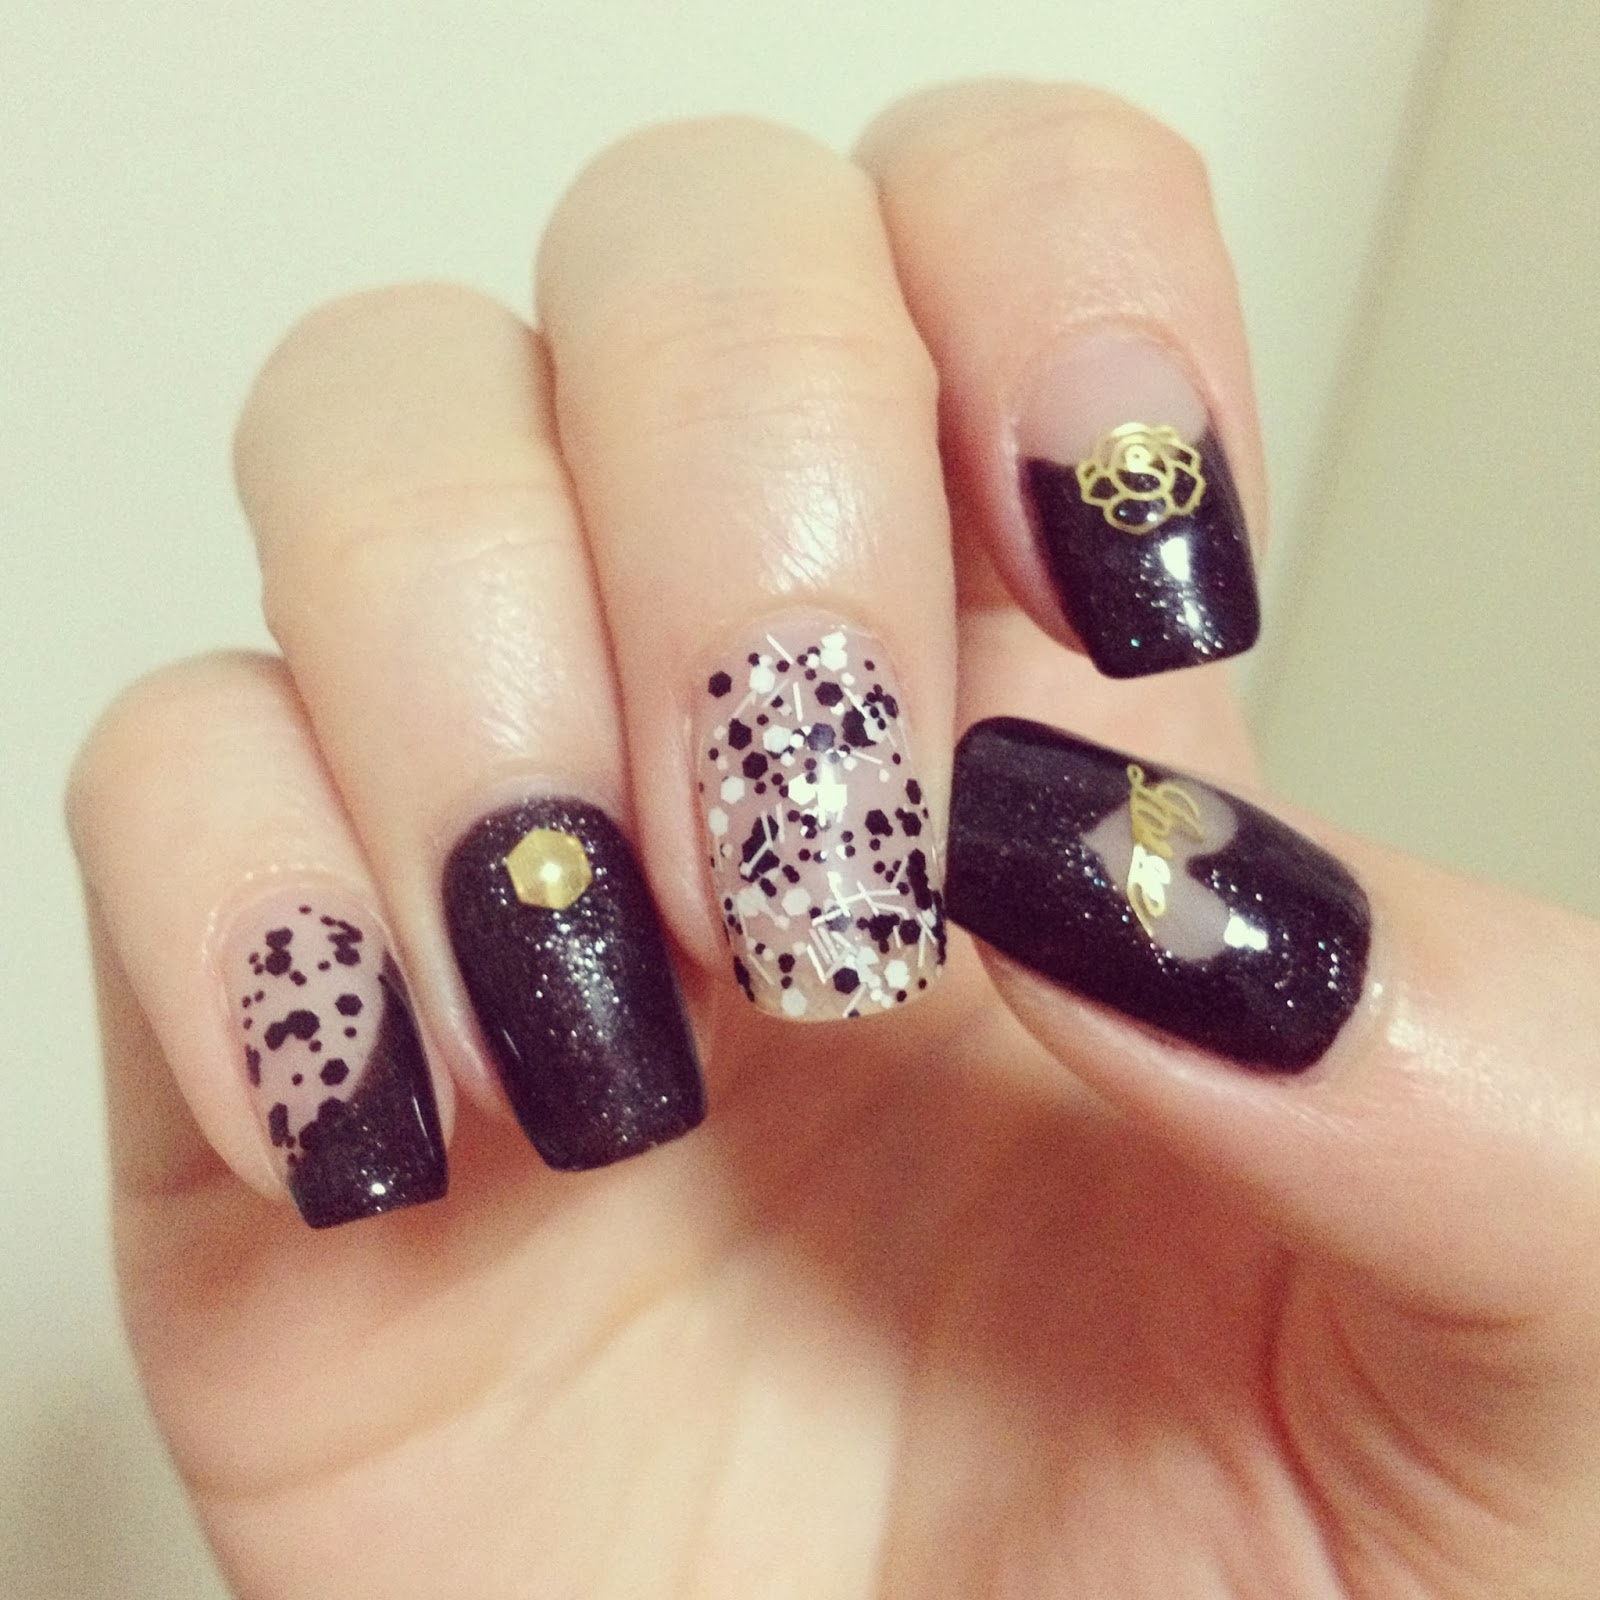 Nail Indulgence De Beau: Another gorgeous design to spice up my nail ...